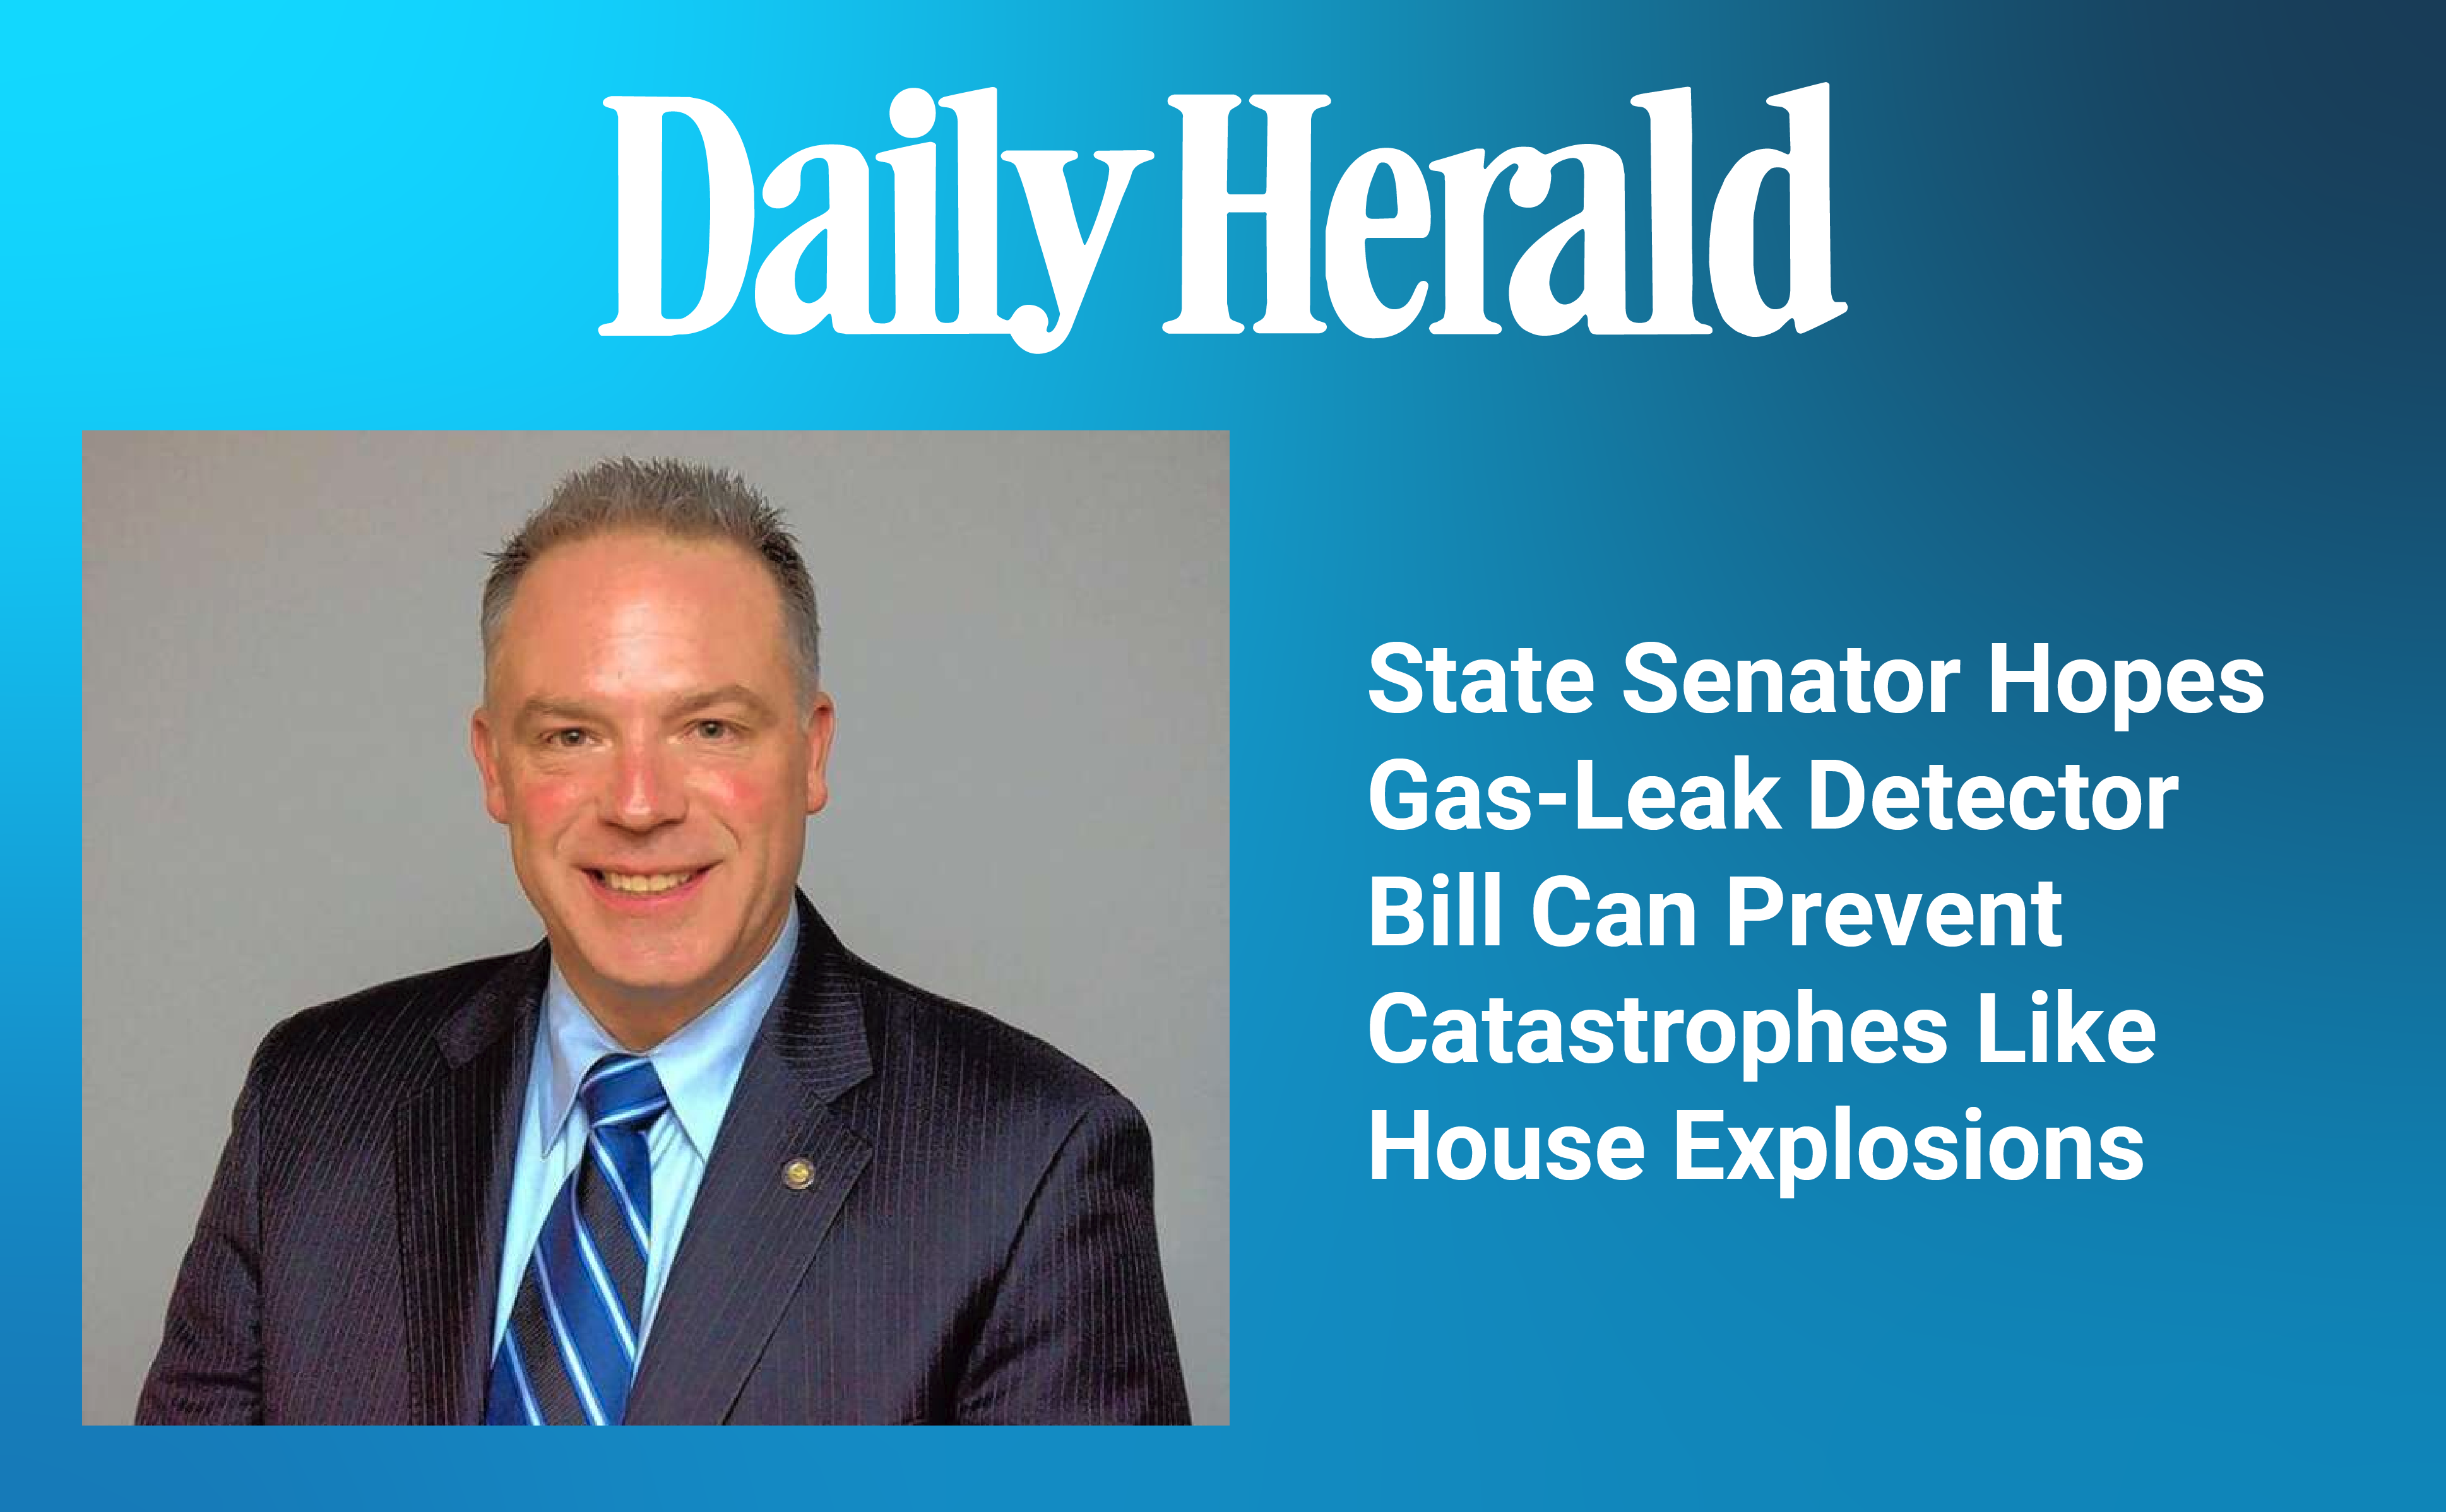 State Senator Hopes Gas-Leak Detector Bill Can Prevent Catastrophes Like House Explosions